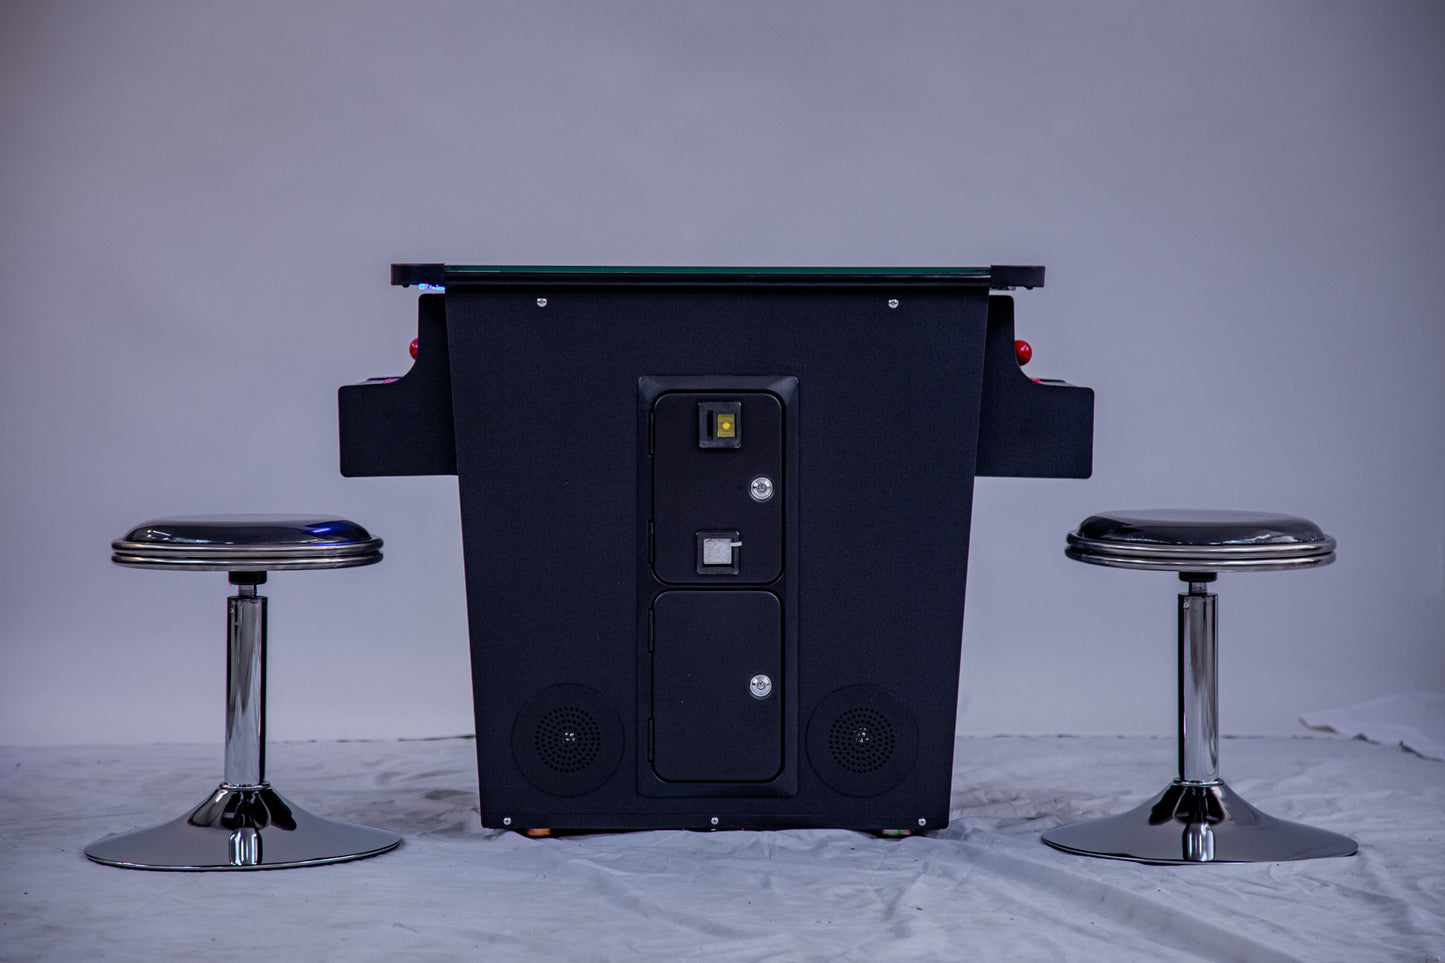 Full-sized Cocktail Table Arcade Game with 60 Classic Games with Trackball